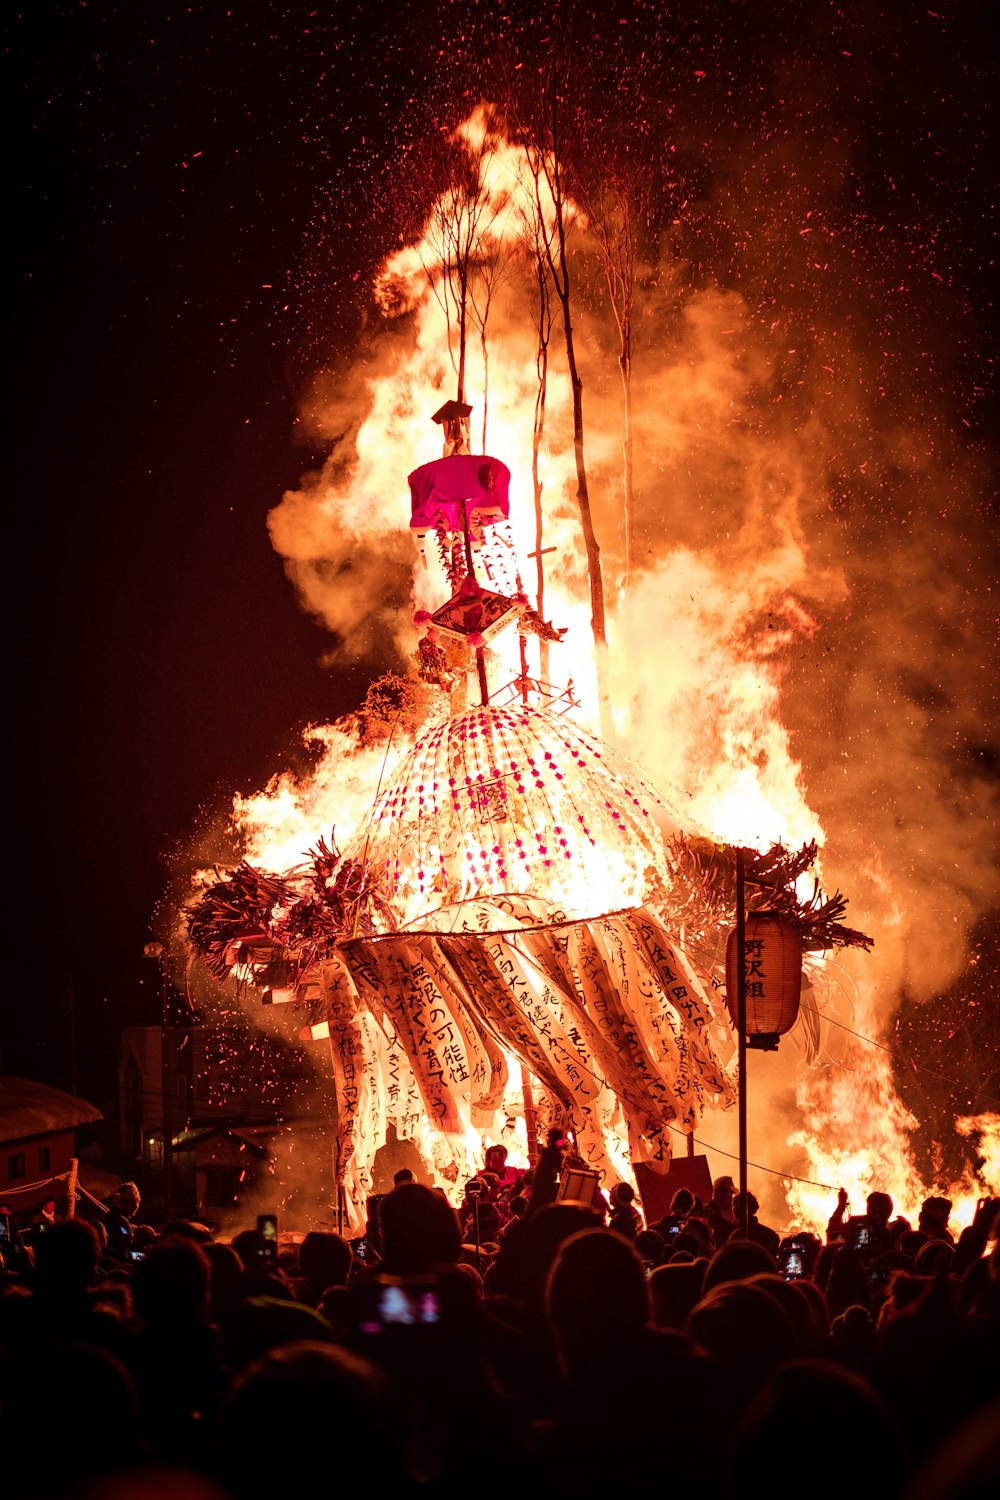 a large group of people watching a person on a tower with fire